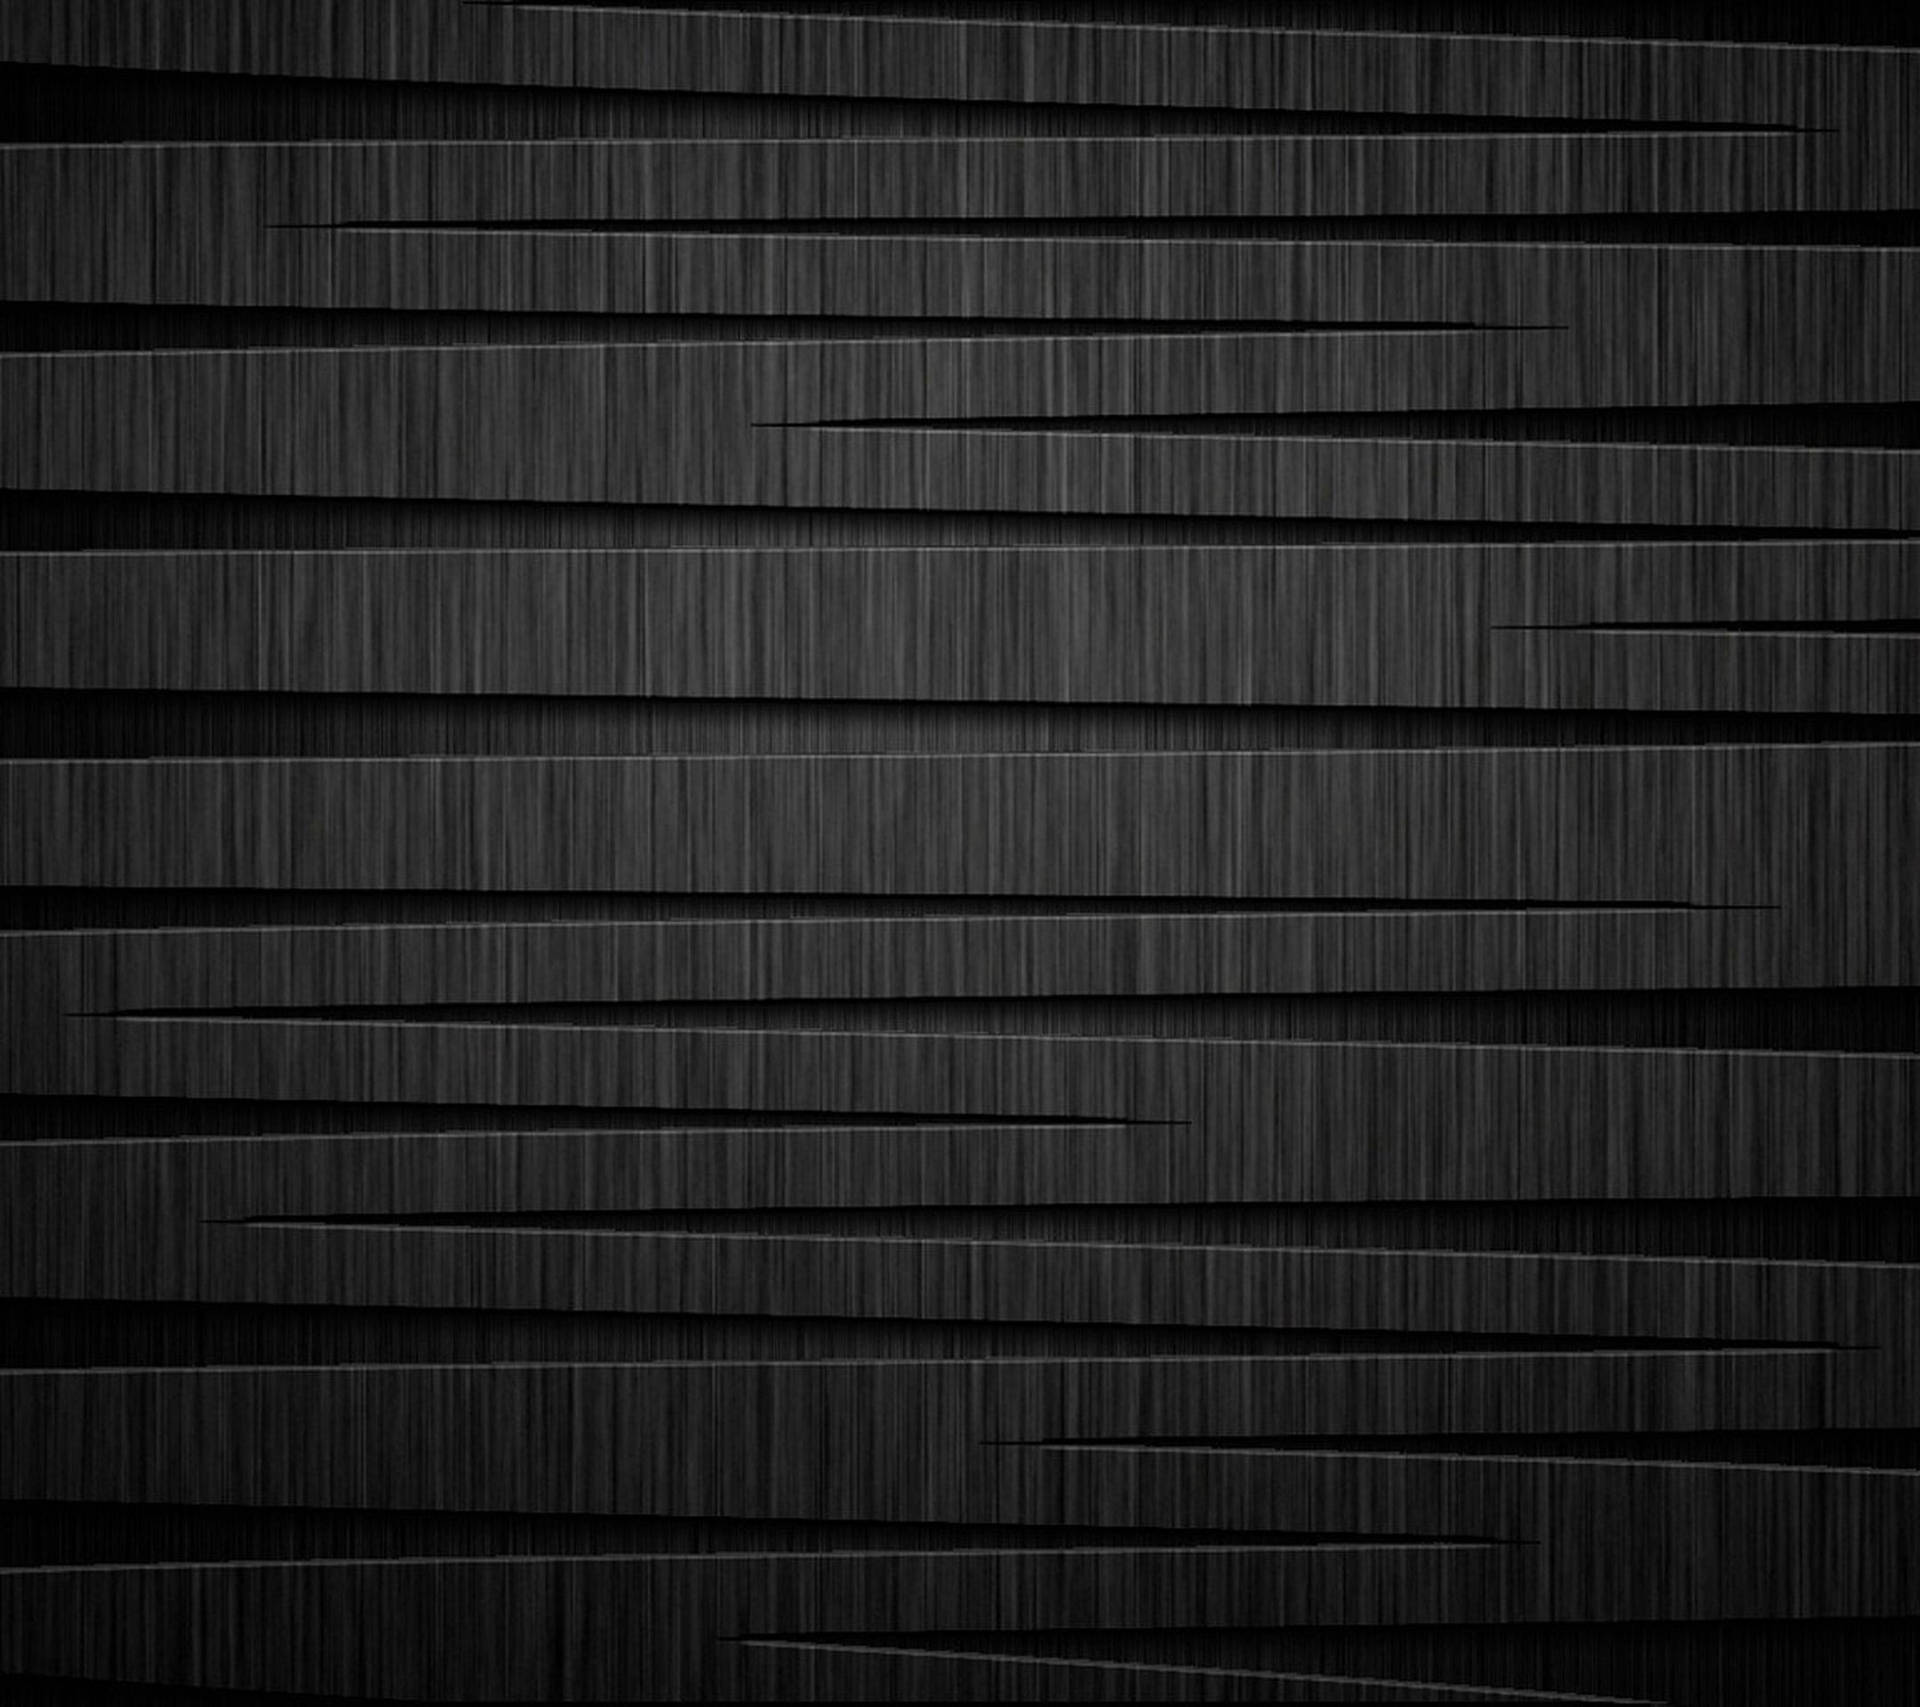 Abstract Wood Texture Black Pattern